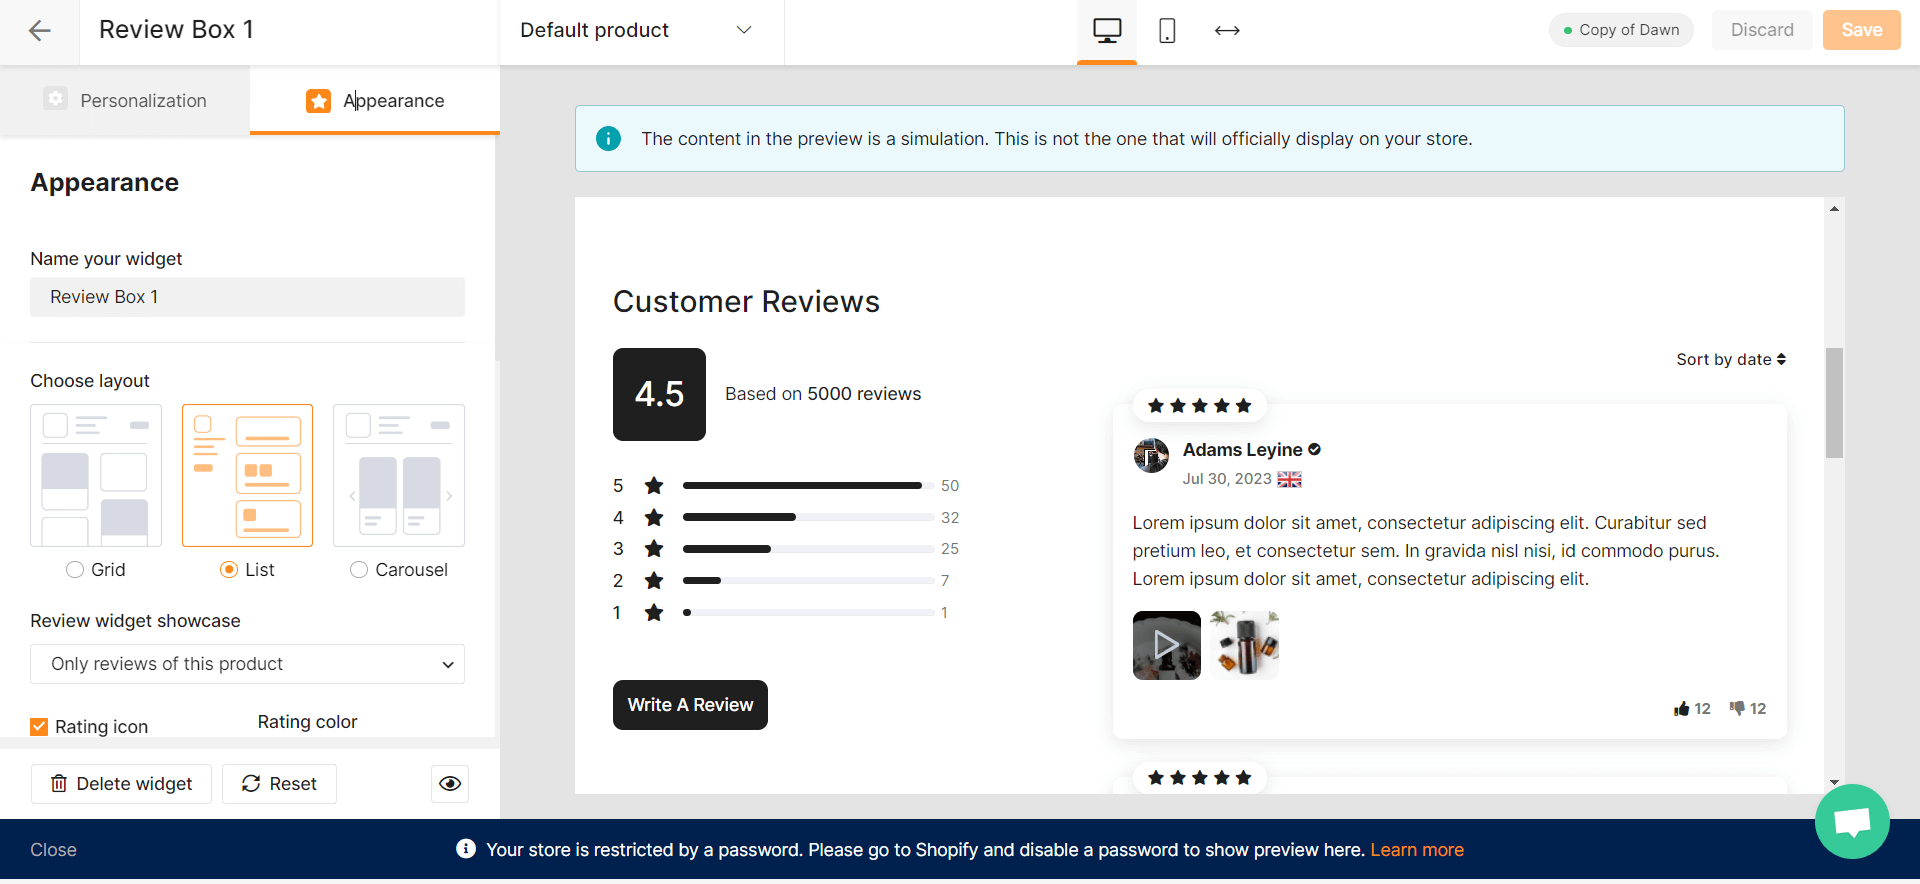 Editing your review widget in real-time